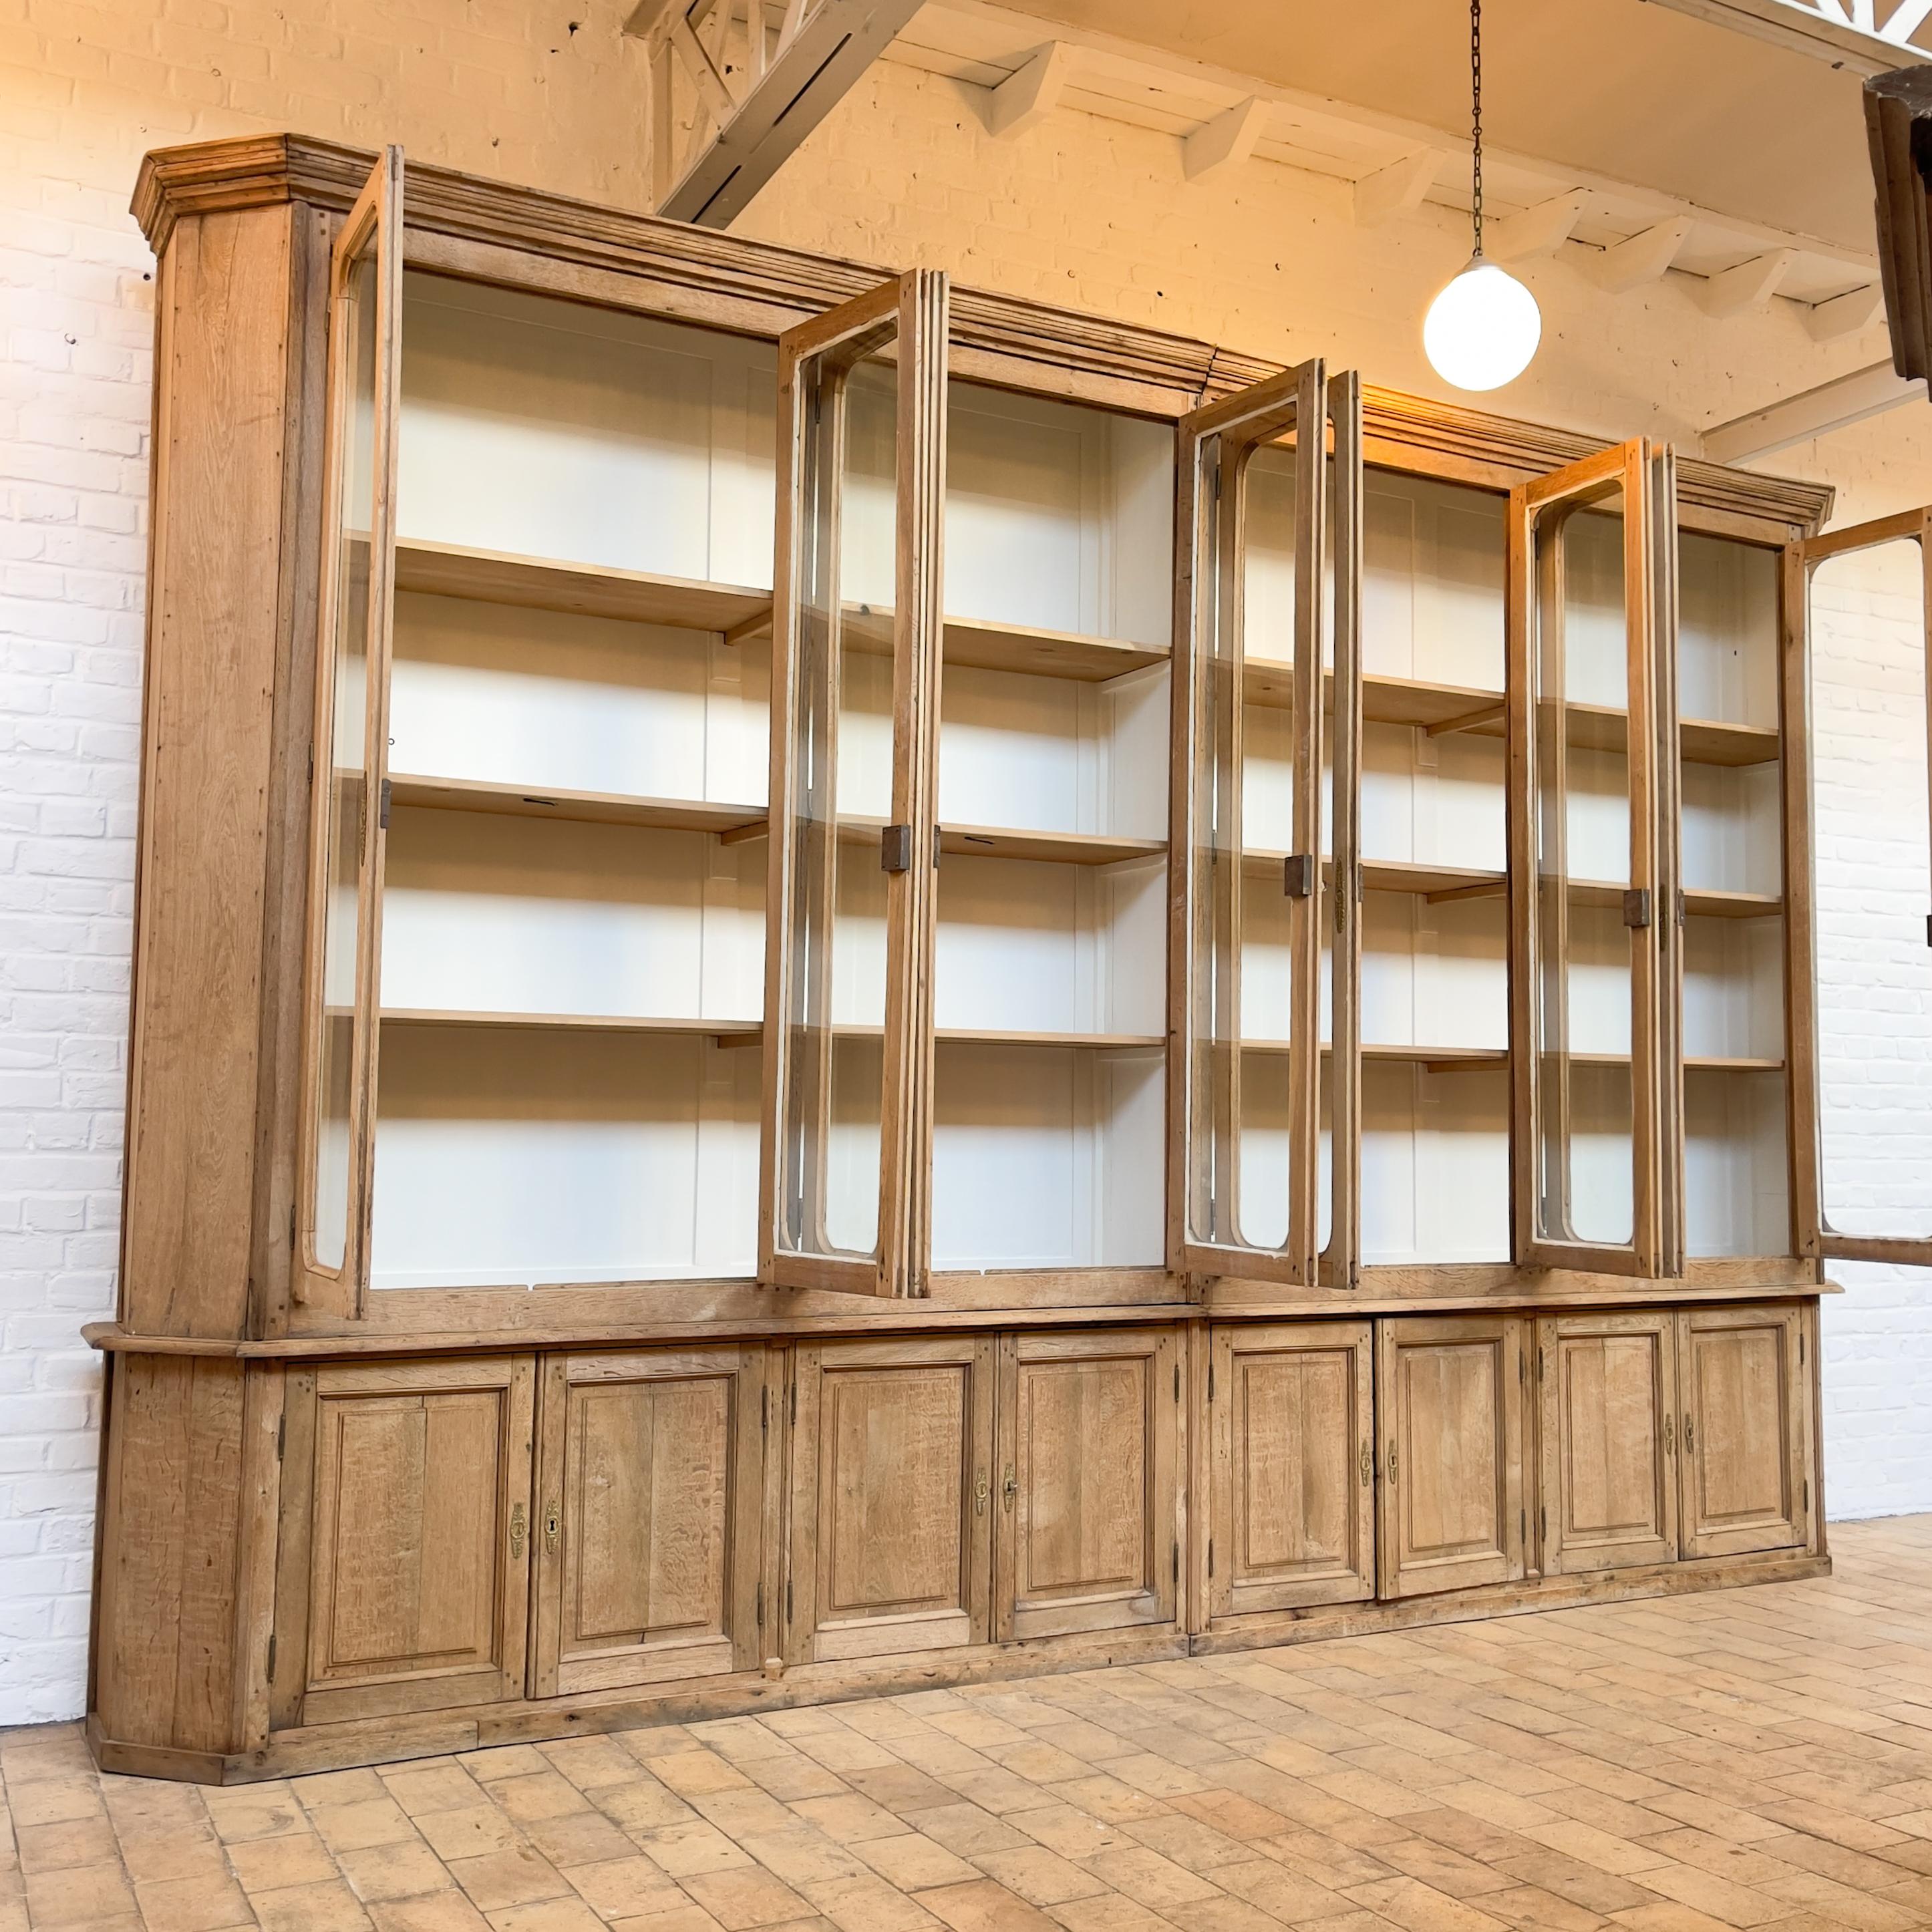 French oak bookcase 1930
Raw oak
16 lockable doors
Furniture in 4 parts
Good condition.